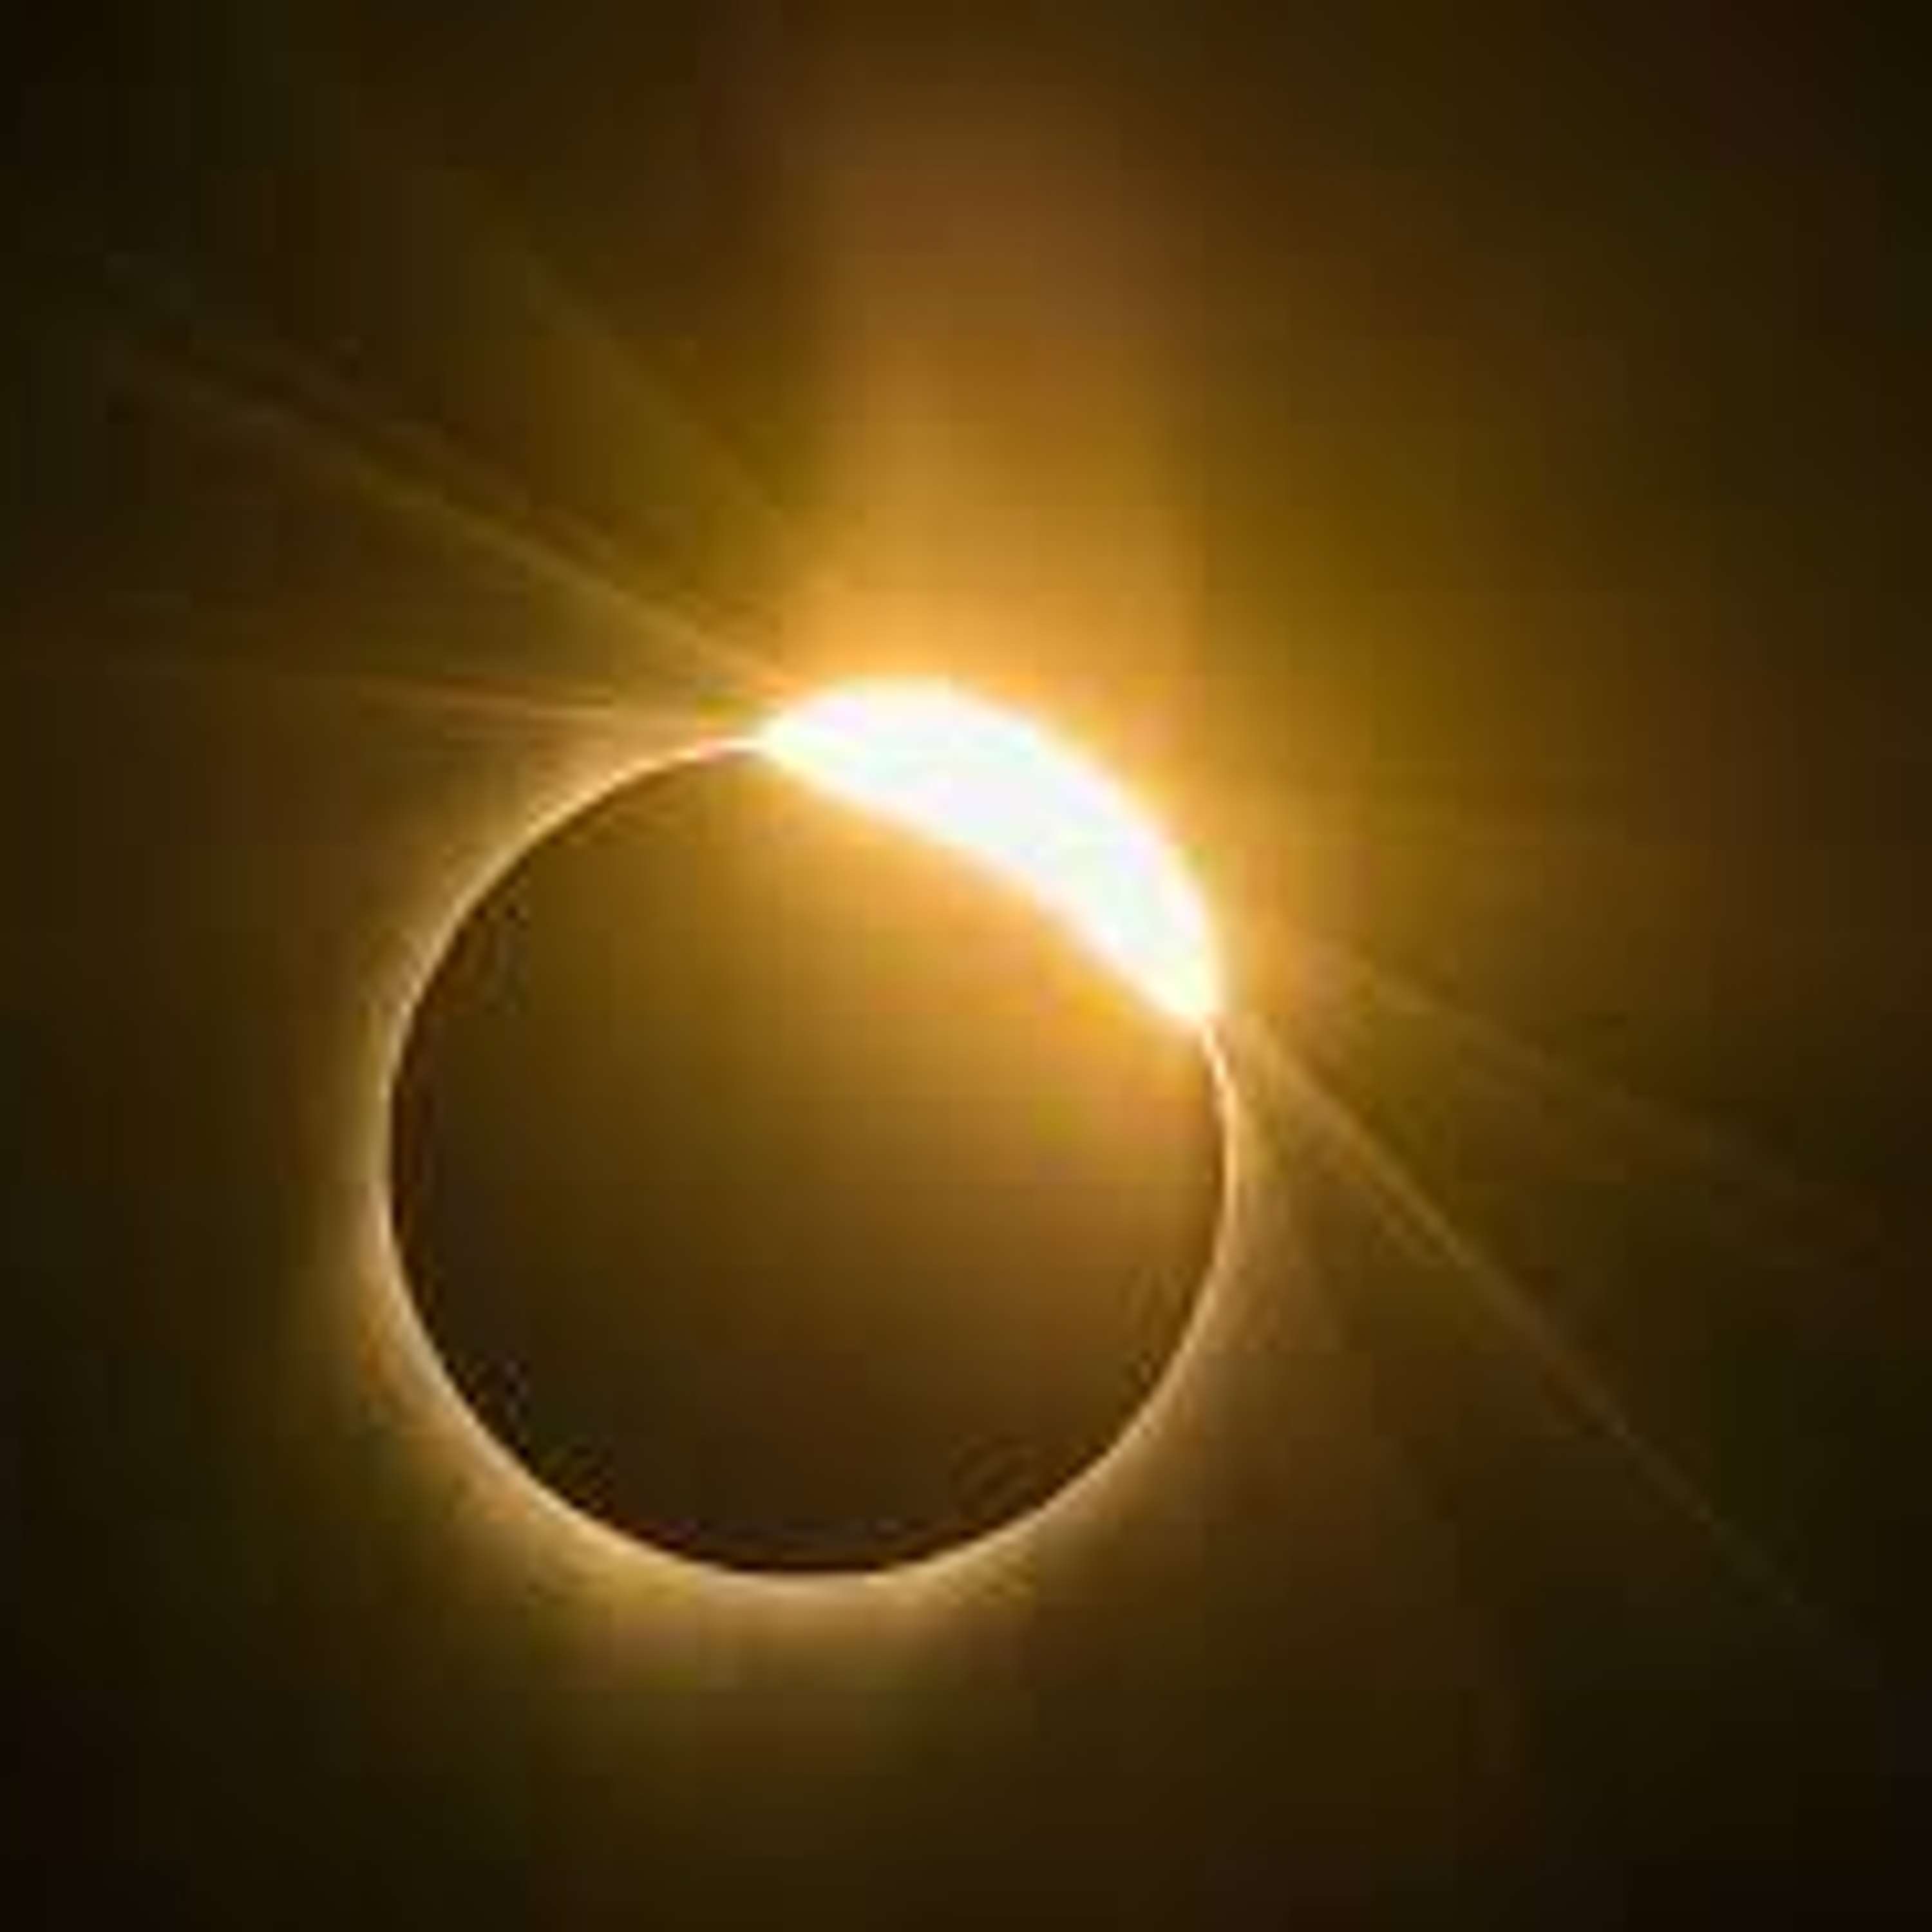 Eclipse Wonders and Social Media Laws